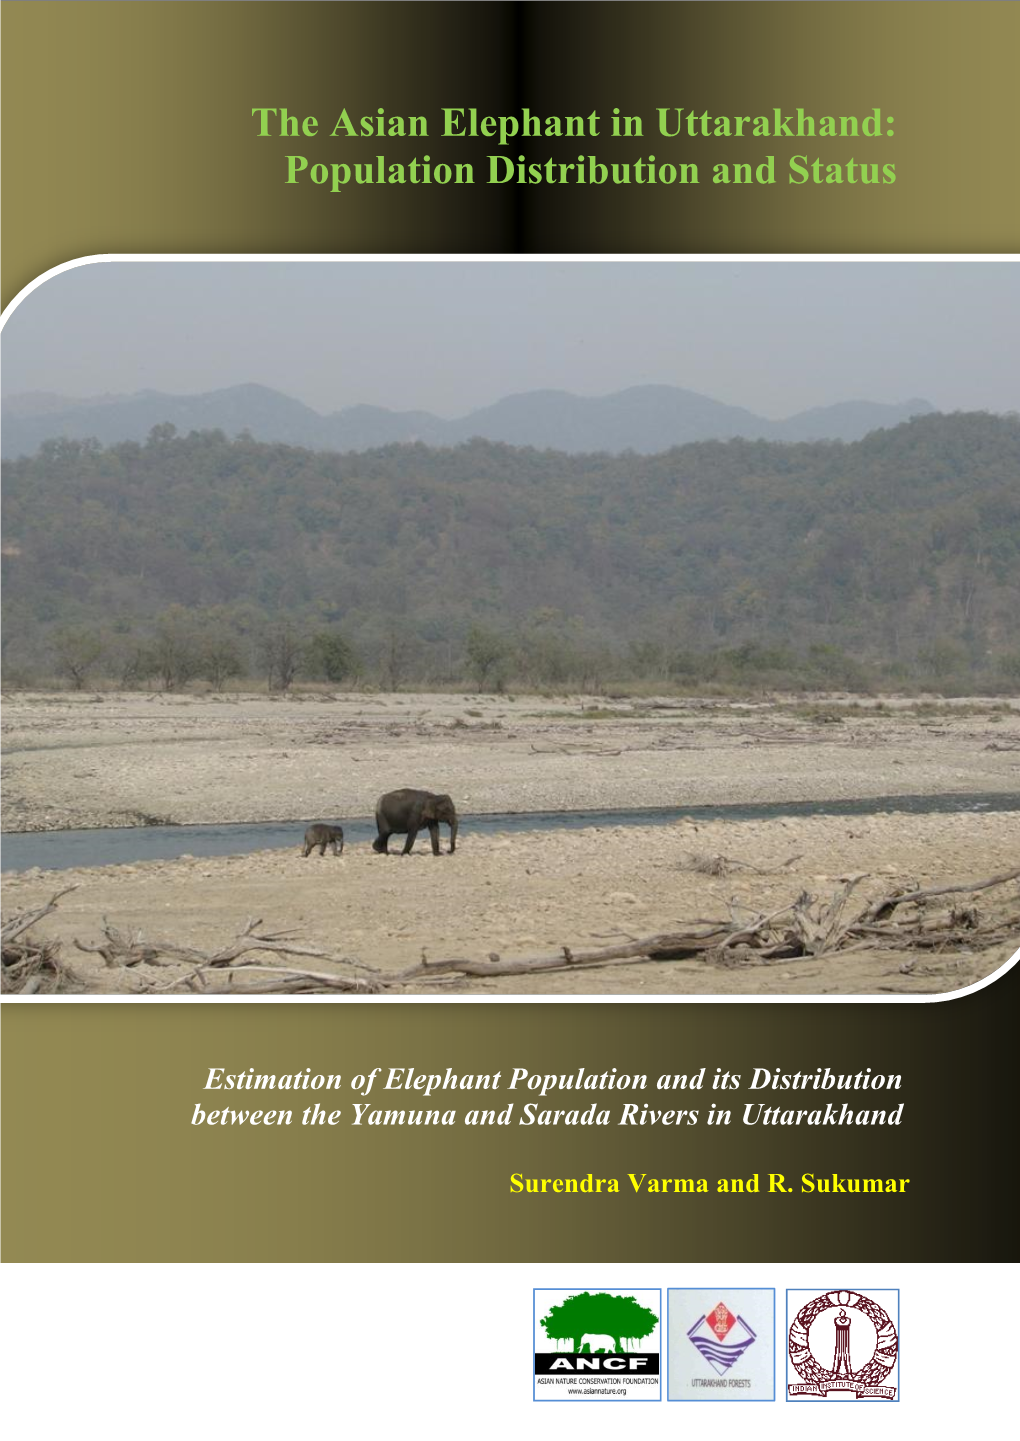 The Asian Elephant in Uttarakhand: Population Distribution and Status